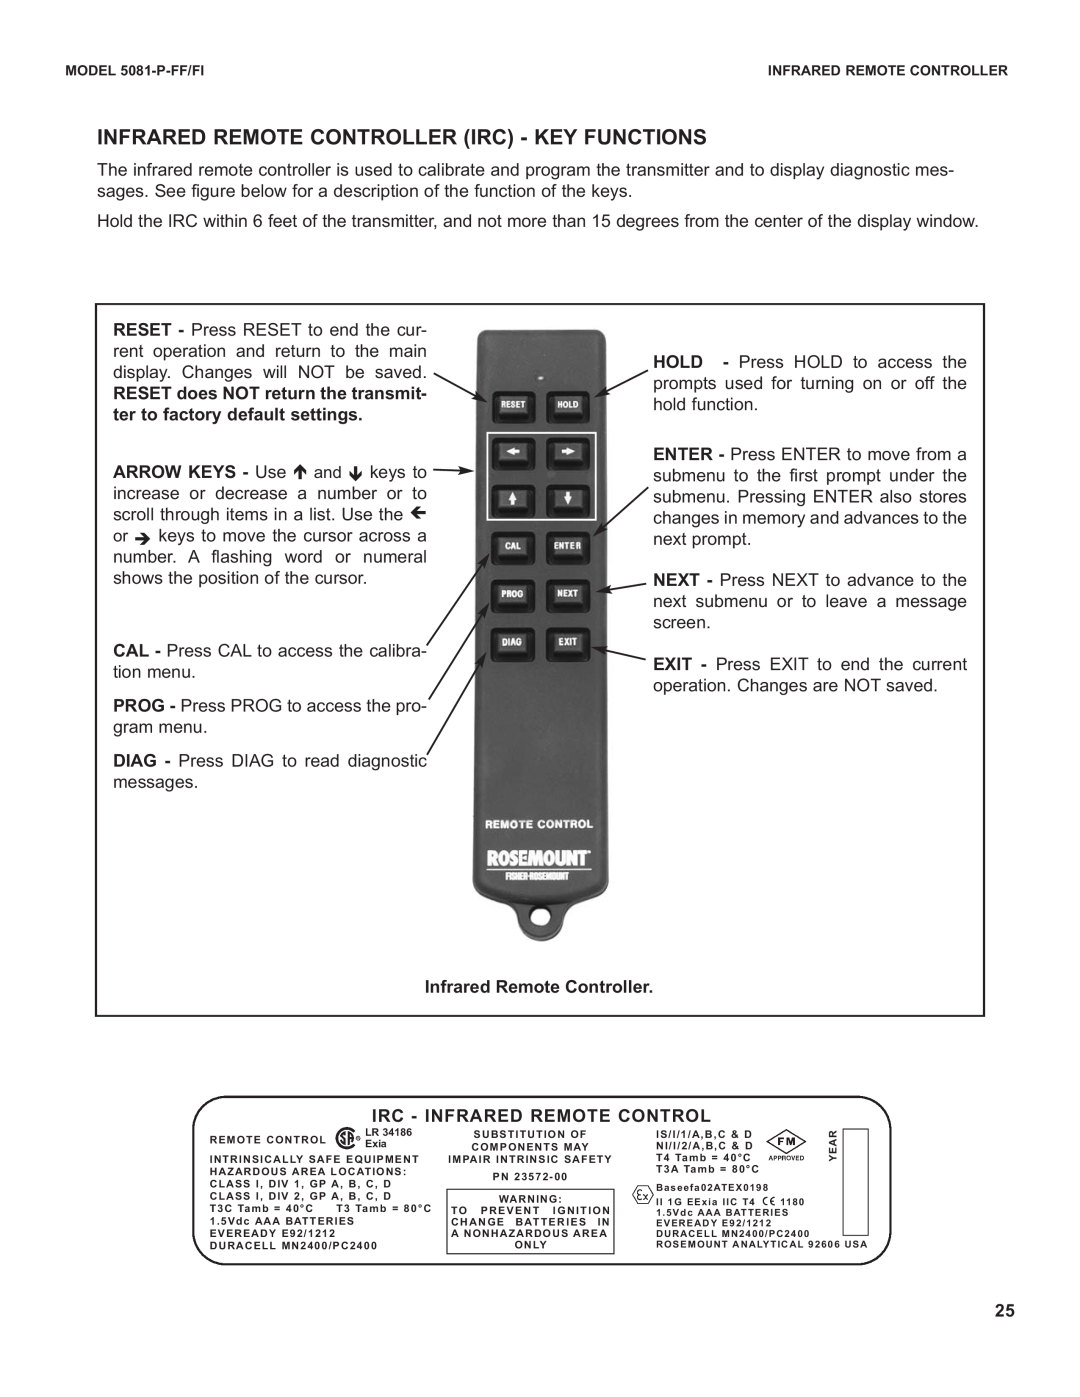 Emerson 5081-P-FF/FI instruction sheet Infrared Remote Controller Irc - Key Functions, Irc - Infrared Remote Control 